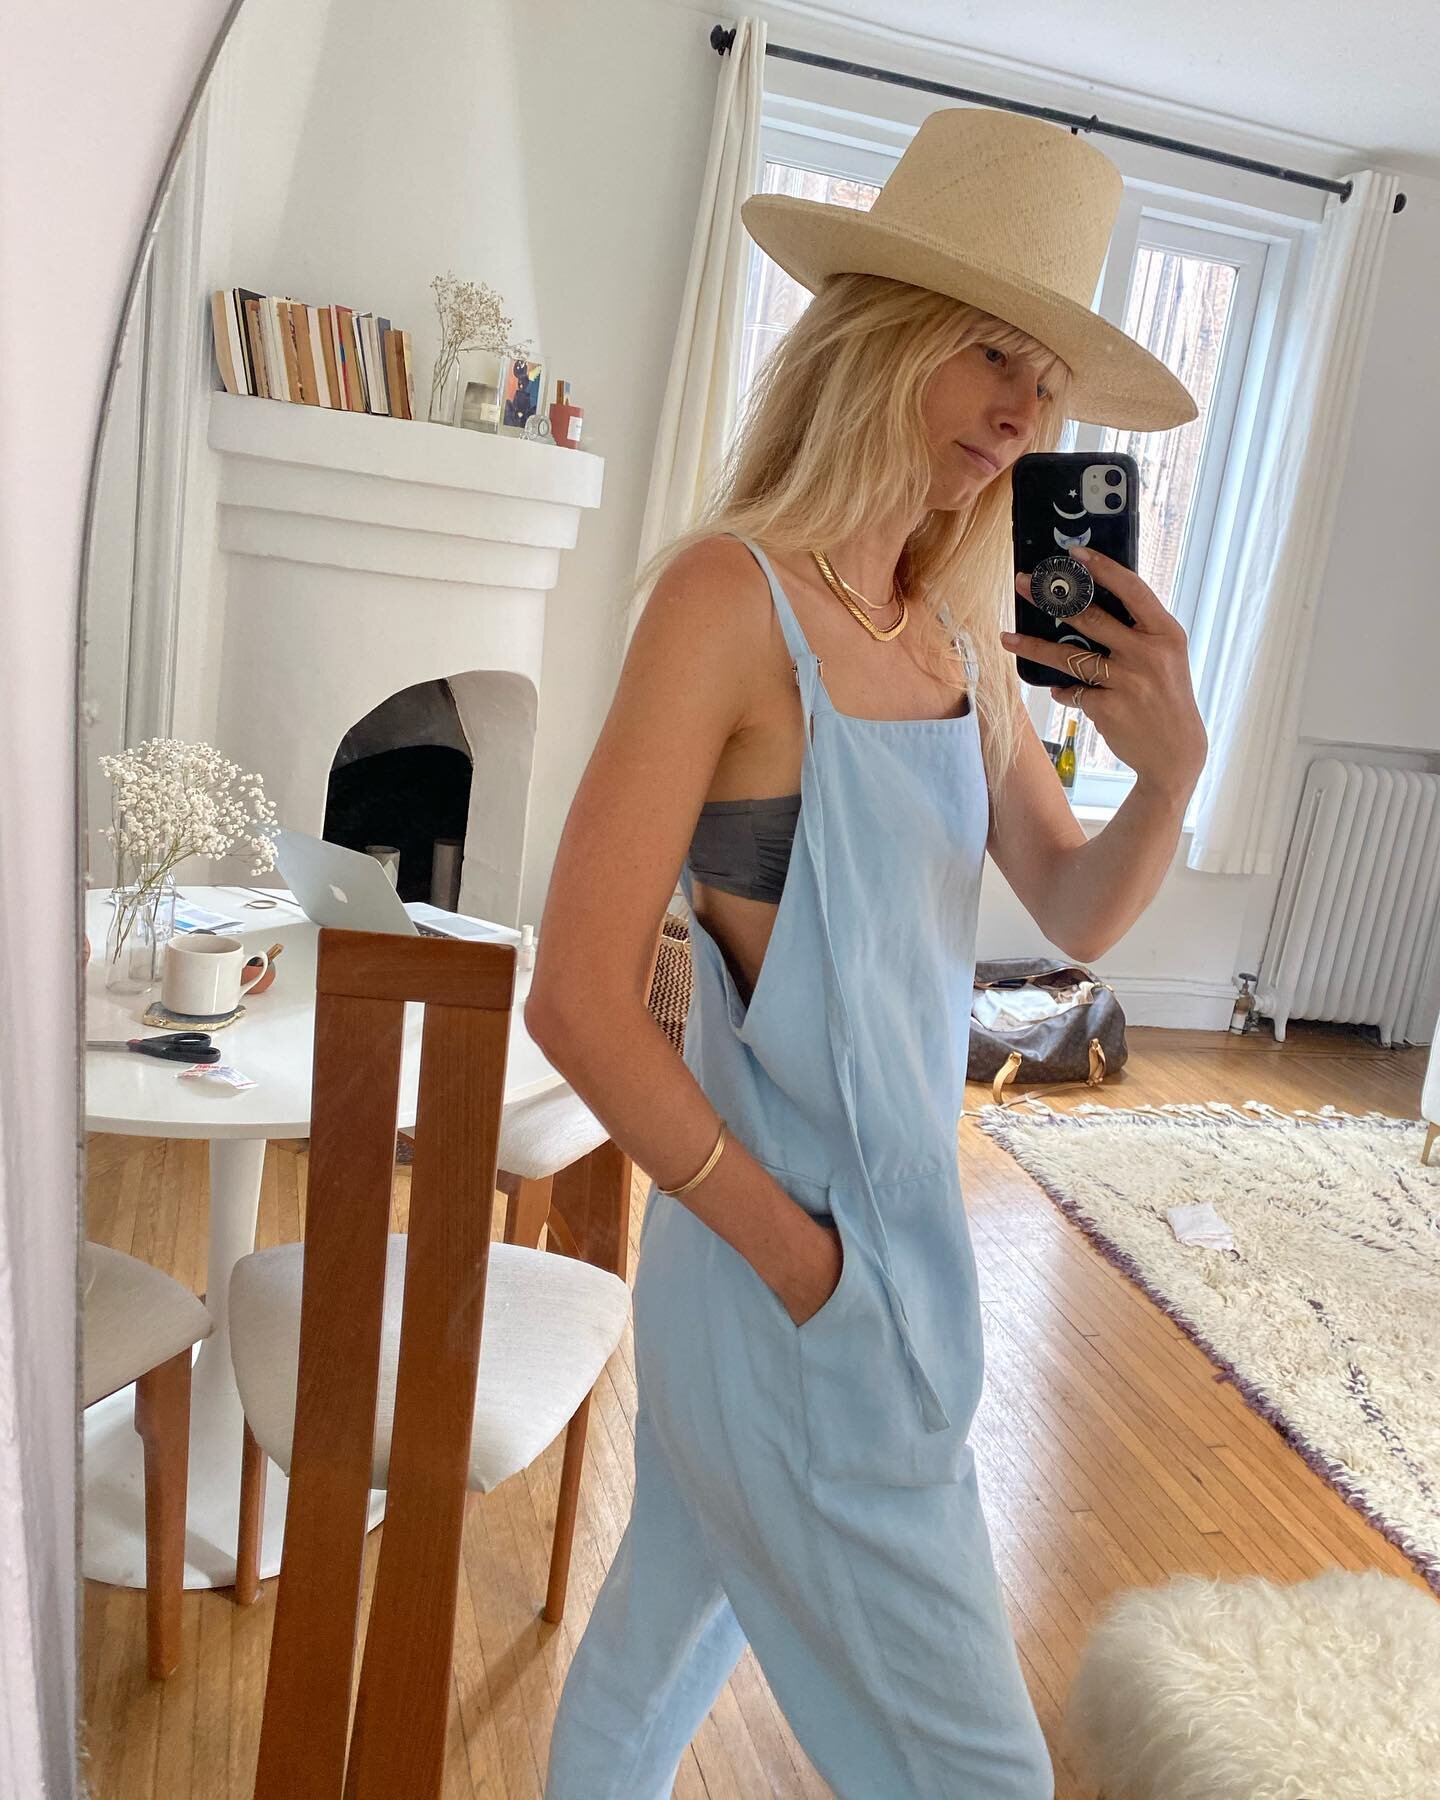 If I dress like a farmer, will I manifest a farm? Maybe I&rsquo;ll just go to the farmer&rsquo;s market instead. 🌞 Get 15% off any @freedom_moses_official beach slides (last photo) &lsquo;till Sept 13 using code Natalie15. 

Enjoy! Xx